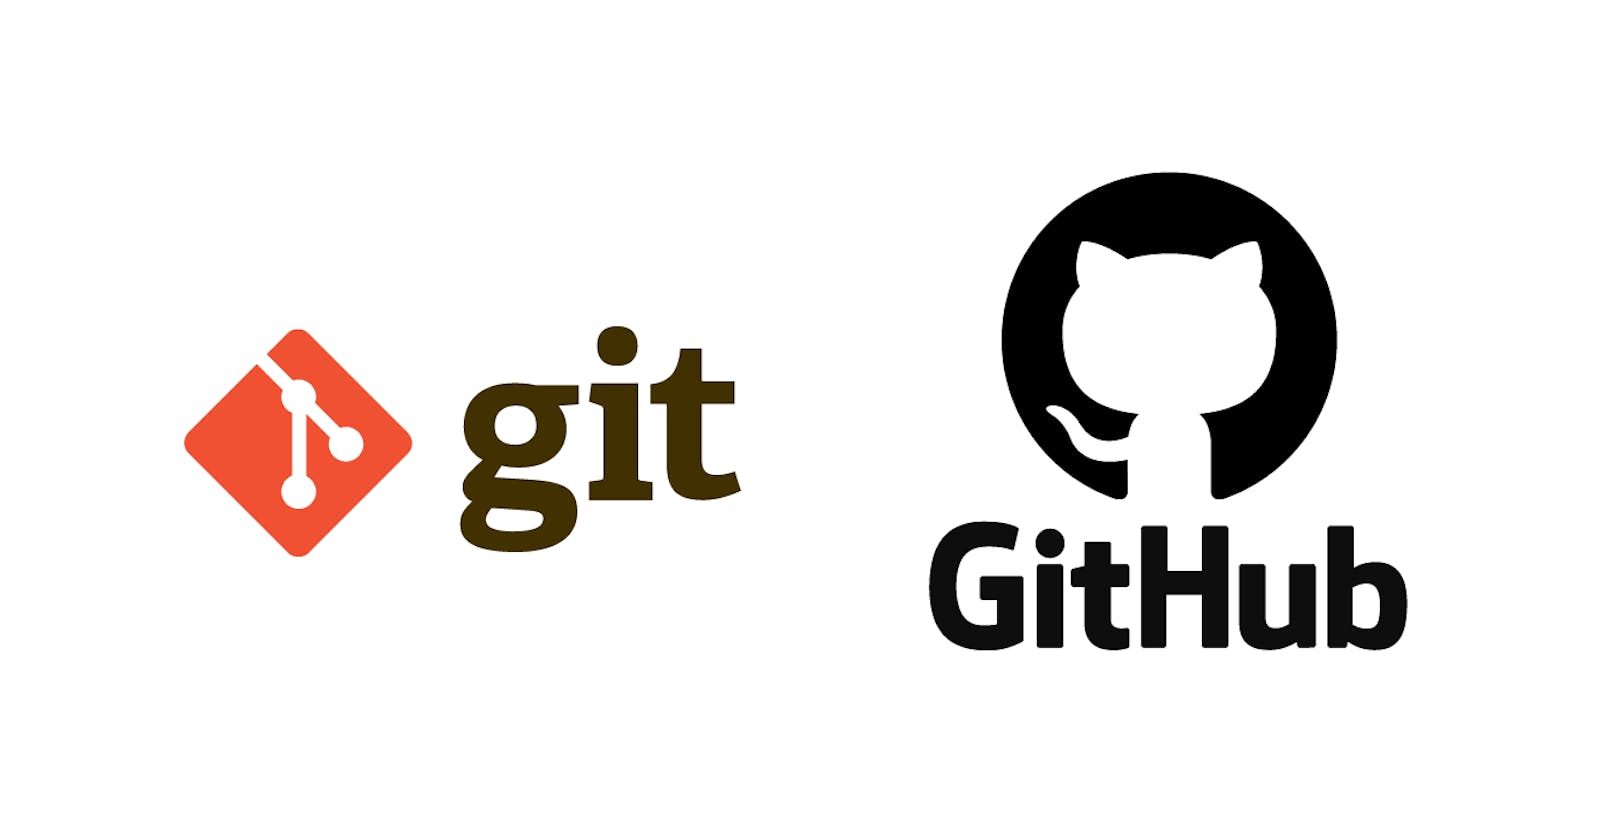 Basic Git Analogy for Contributing to Open Source Project